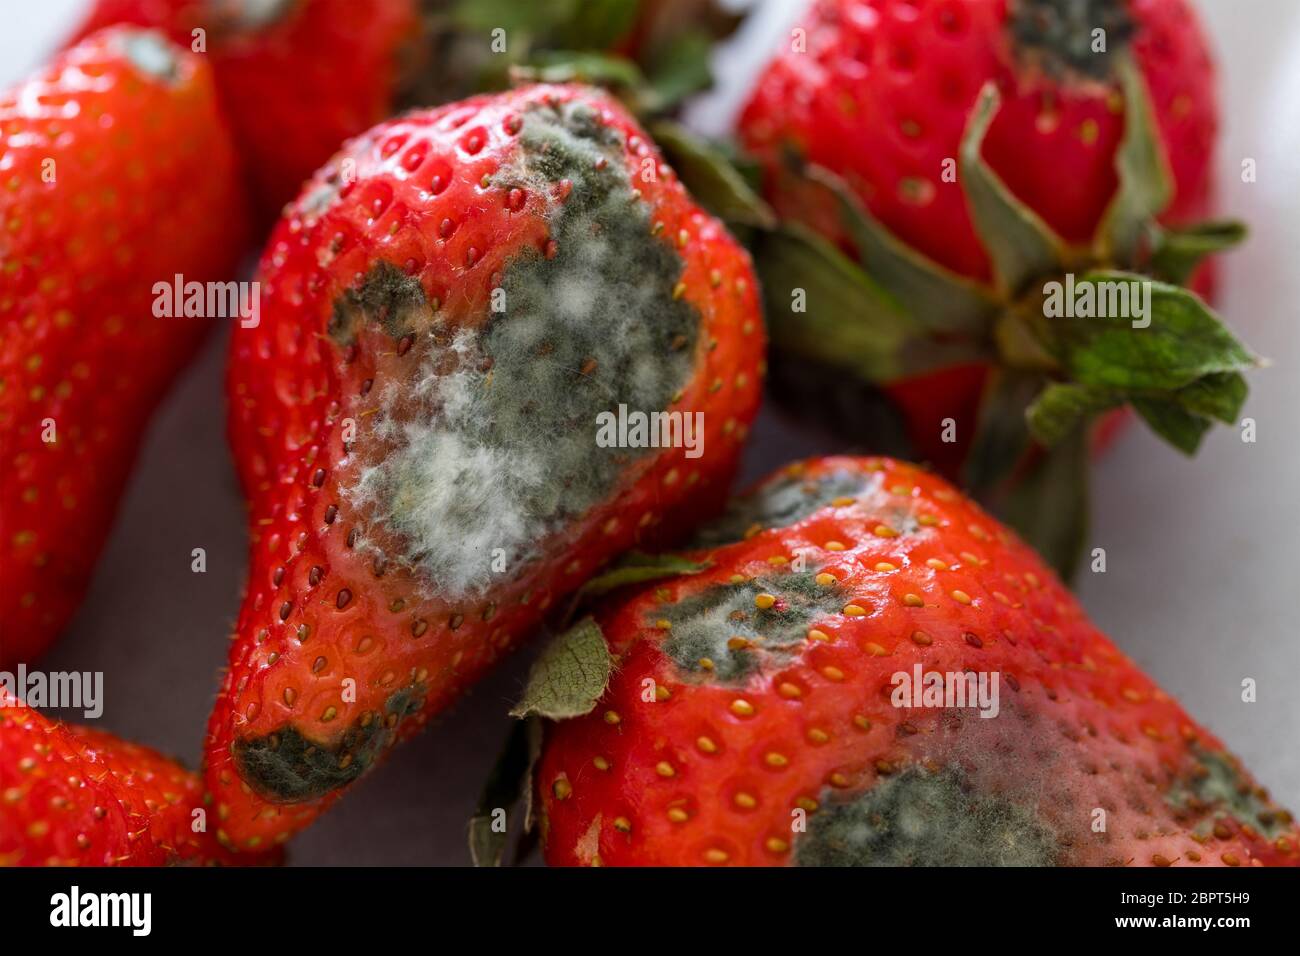 Strawberries with mold Stock Photo